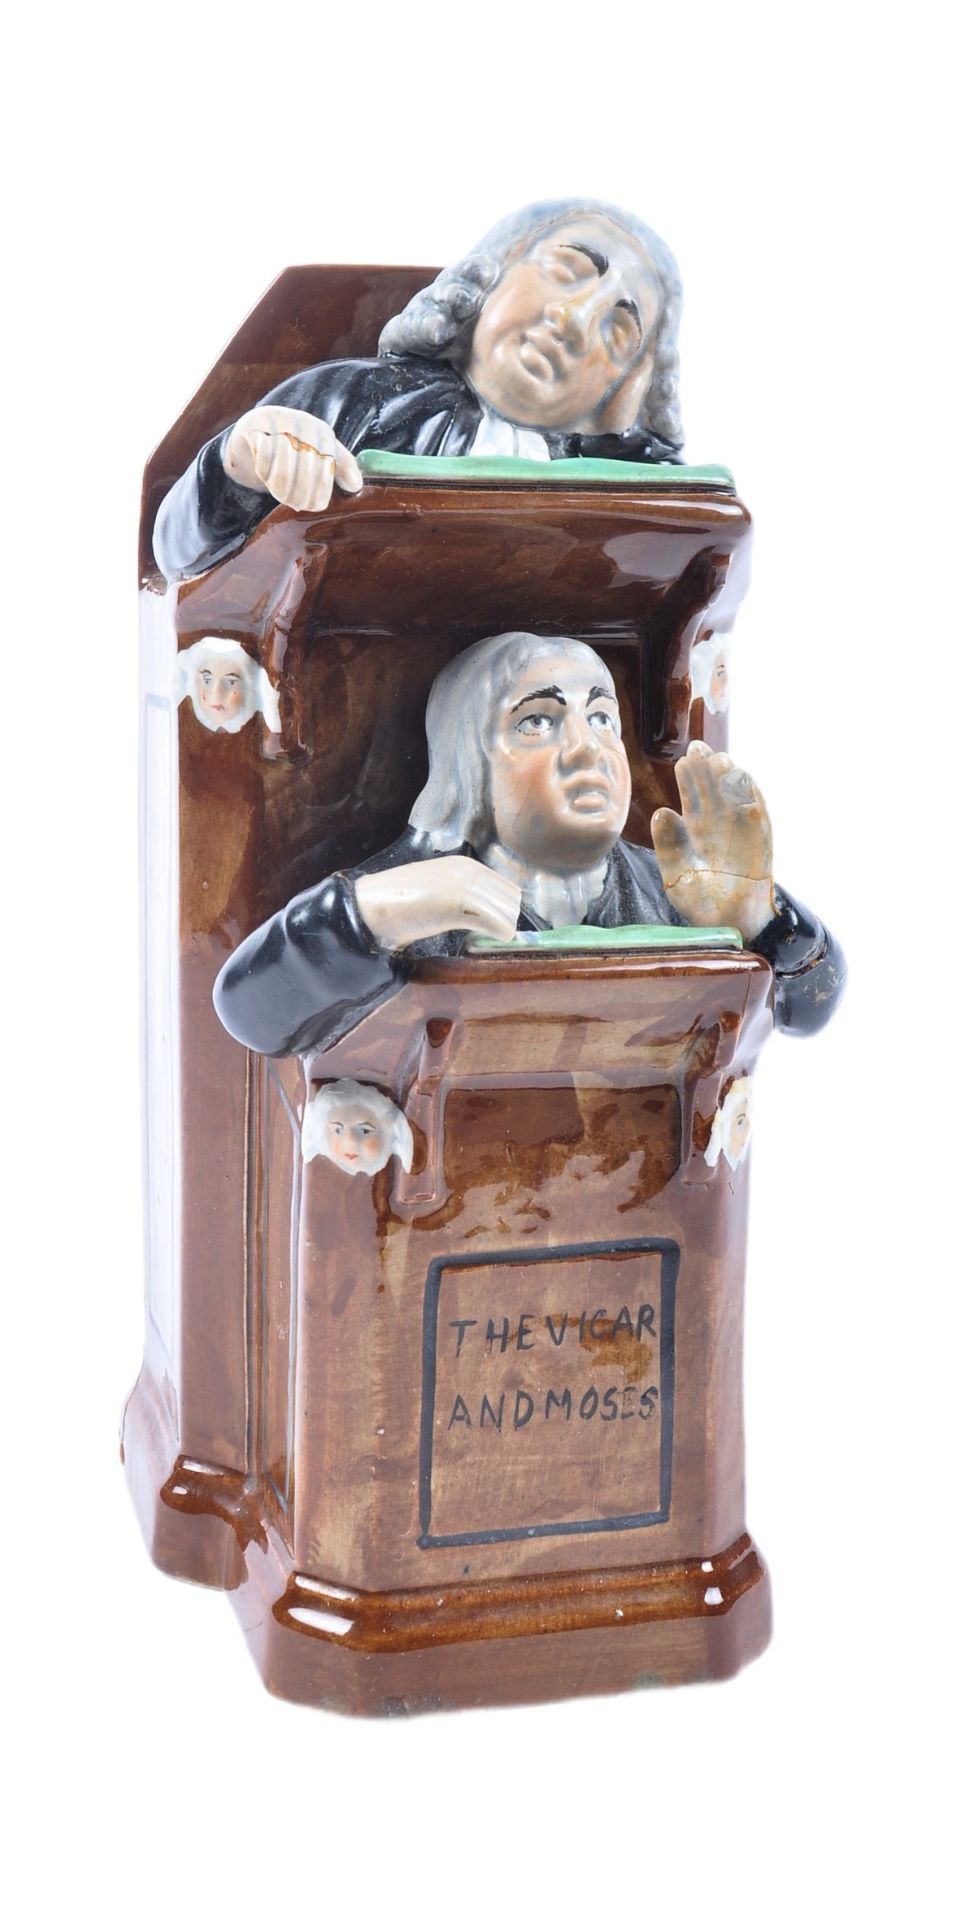 STAFFORDSHIRE THE VICAR AND MOSES POTTERY GROUP FIGURINE - Image 2 of 6